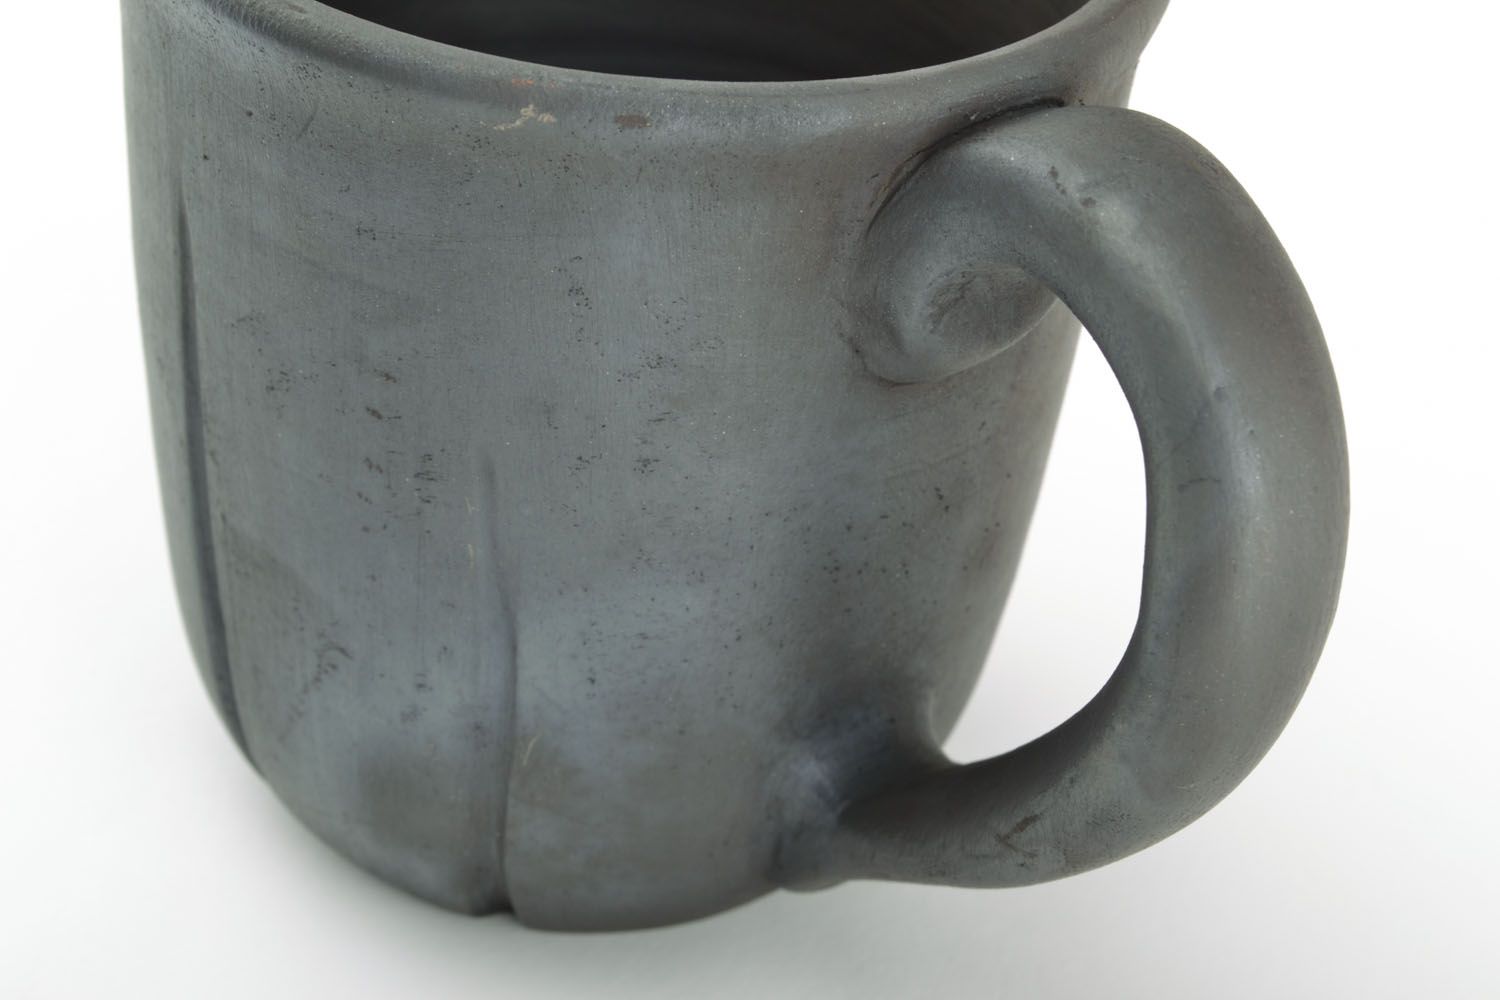 8 oz black smoked clay not glazed coffee or tea mug with handle and no pattern photo 2